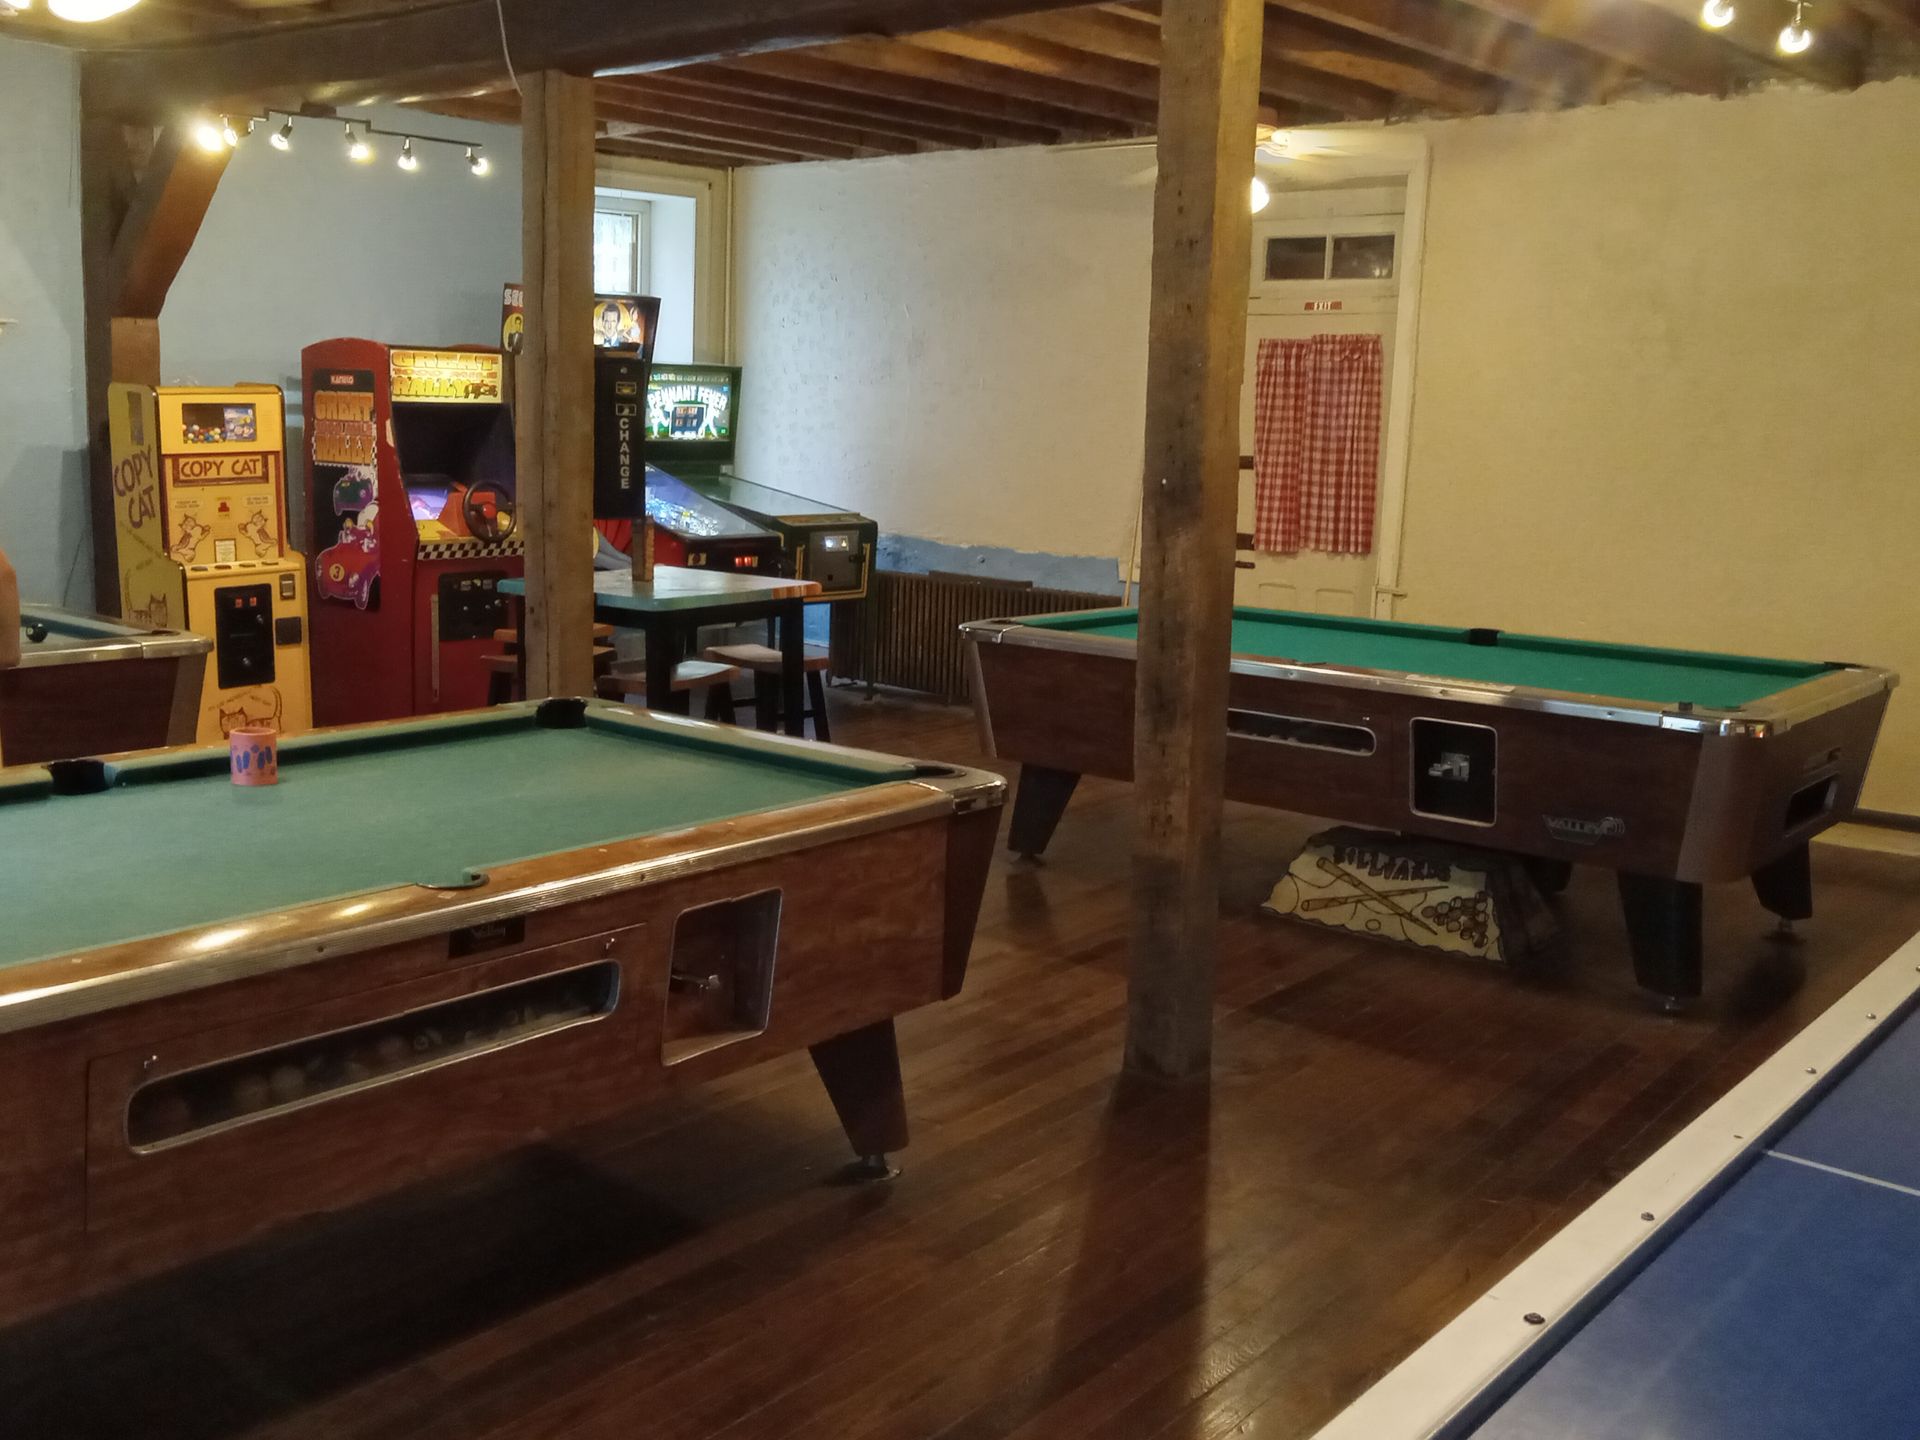 A room with pool tables and arcade games in it